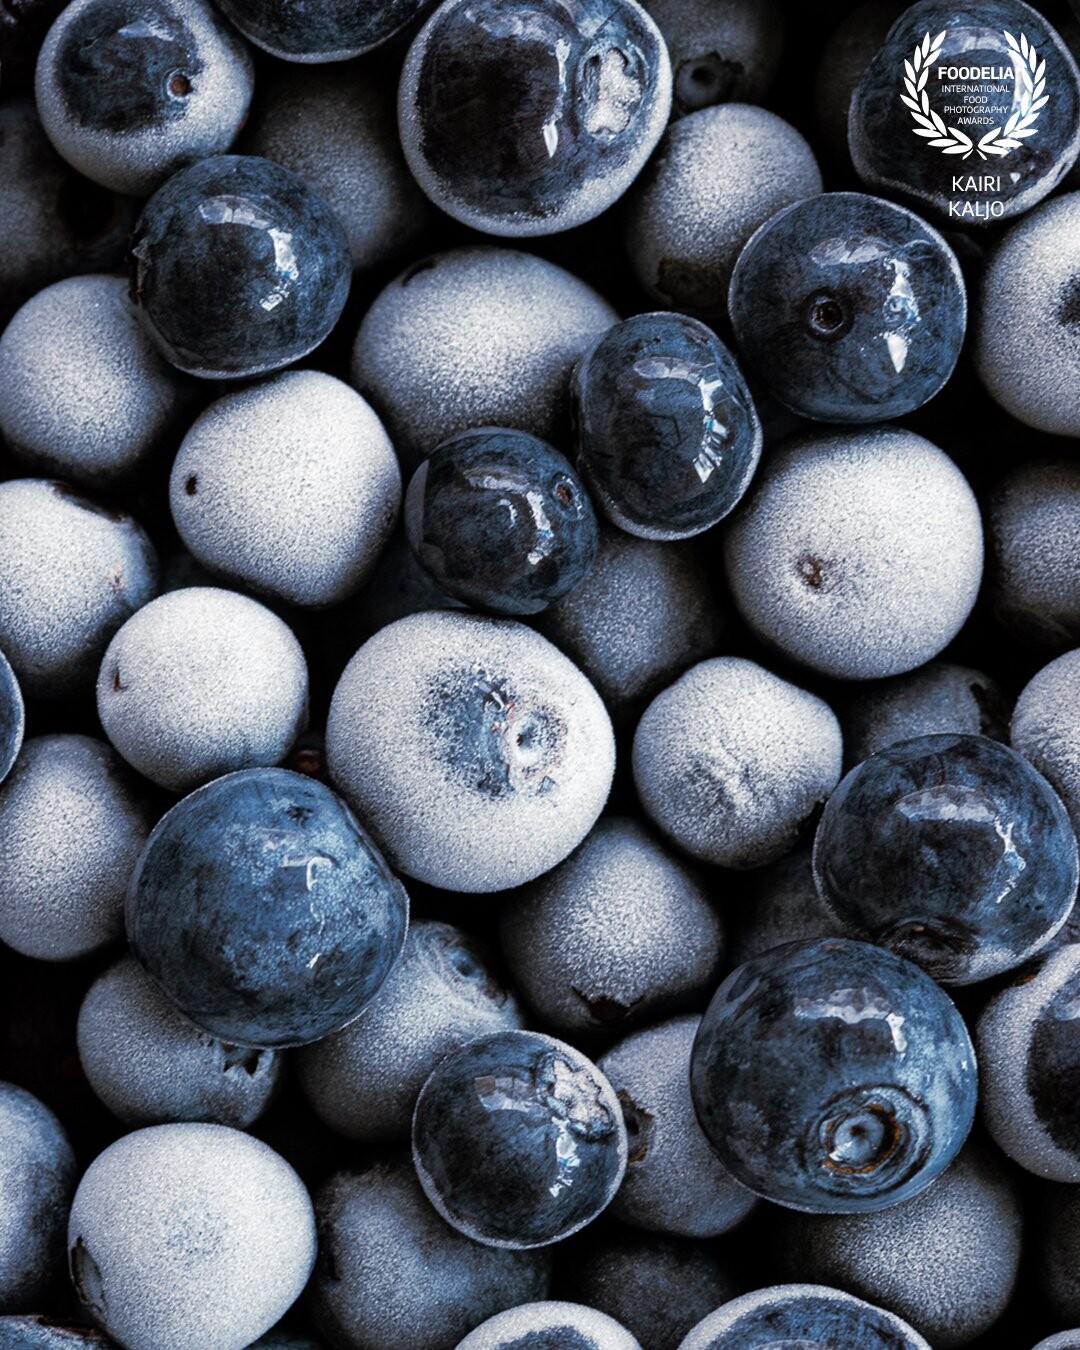 I am a big lover of berries and this image was part of a series of individual shots to capture the whole thawing process from start to finish.